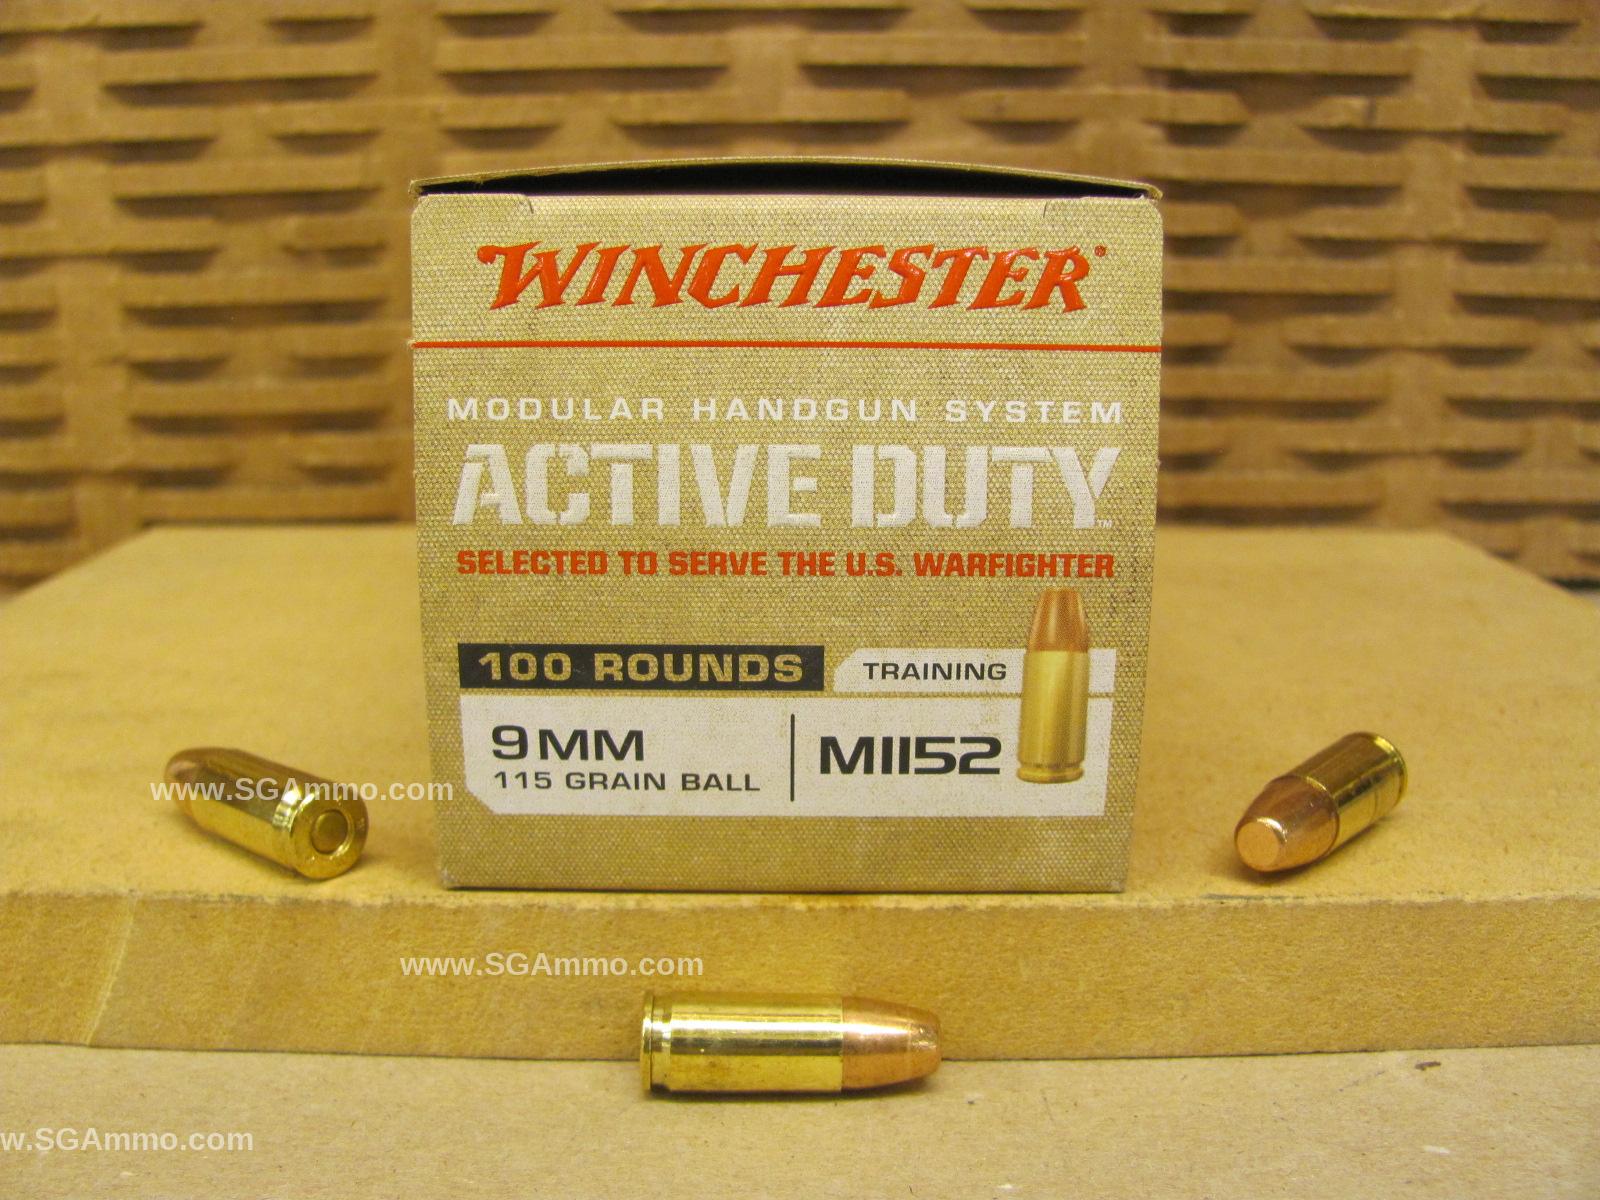 500 Round Case - 9mm Luger 115 Grain Flat Nose FMJ Ball Winchester M1152 Active Duty Ammo - WIN9MHSC 